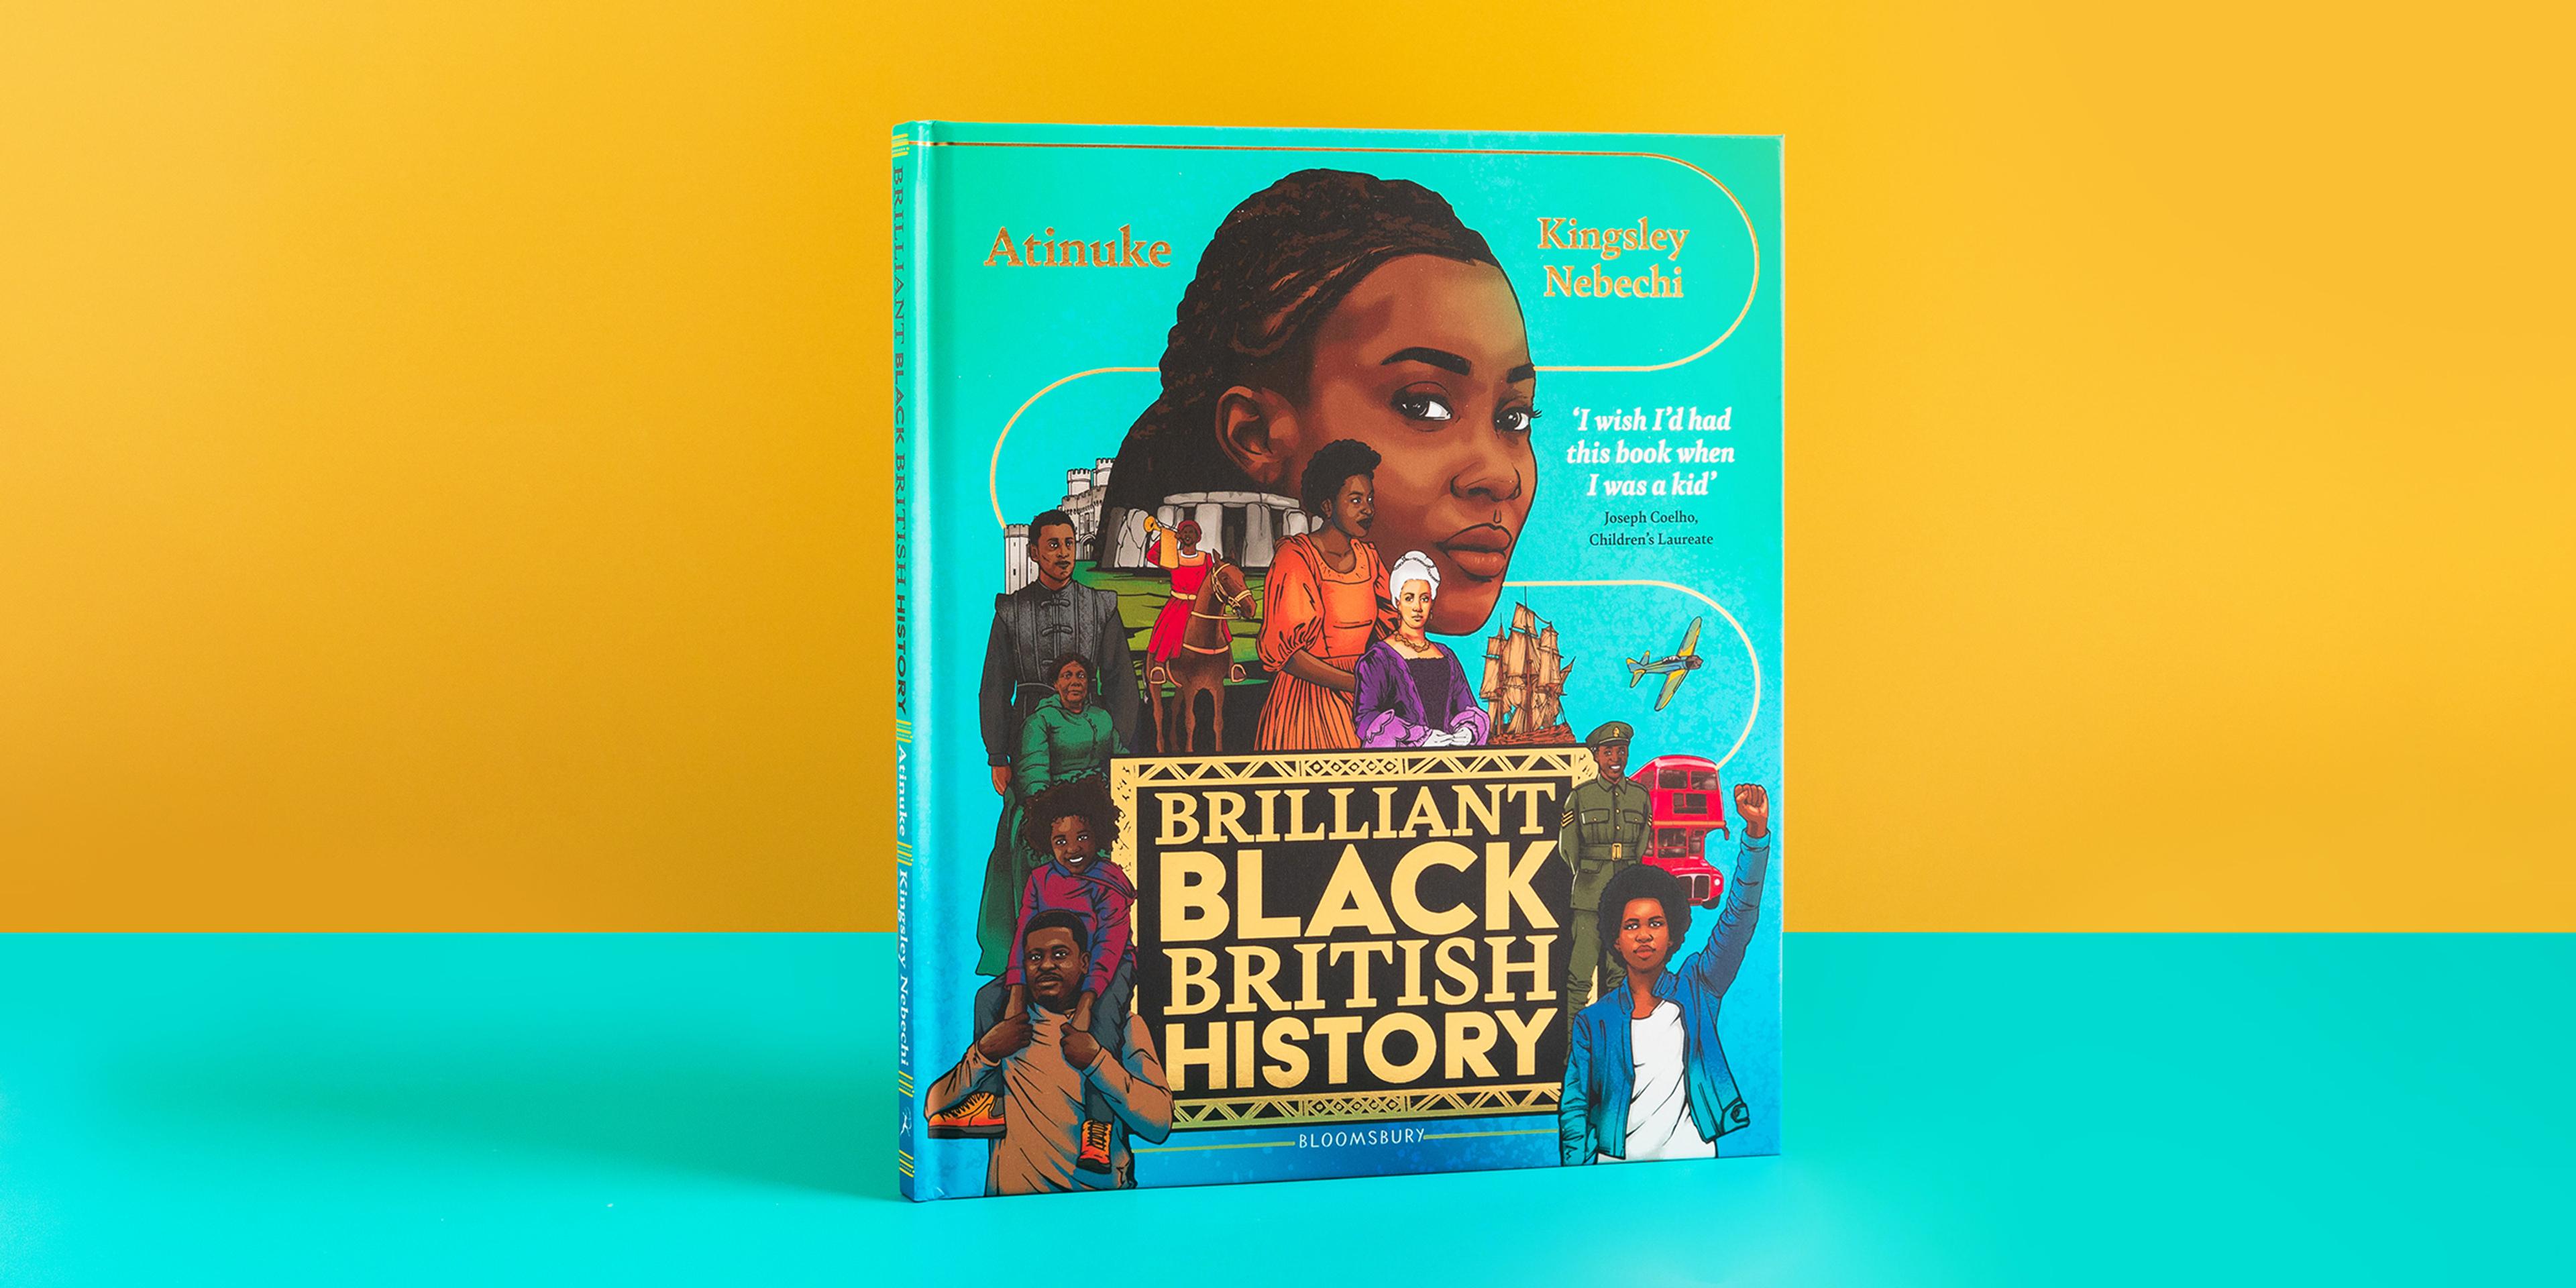 Front cover of Brilliant Black British History, featuring a number of illustrated faces and figures, arranged around the book title.